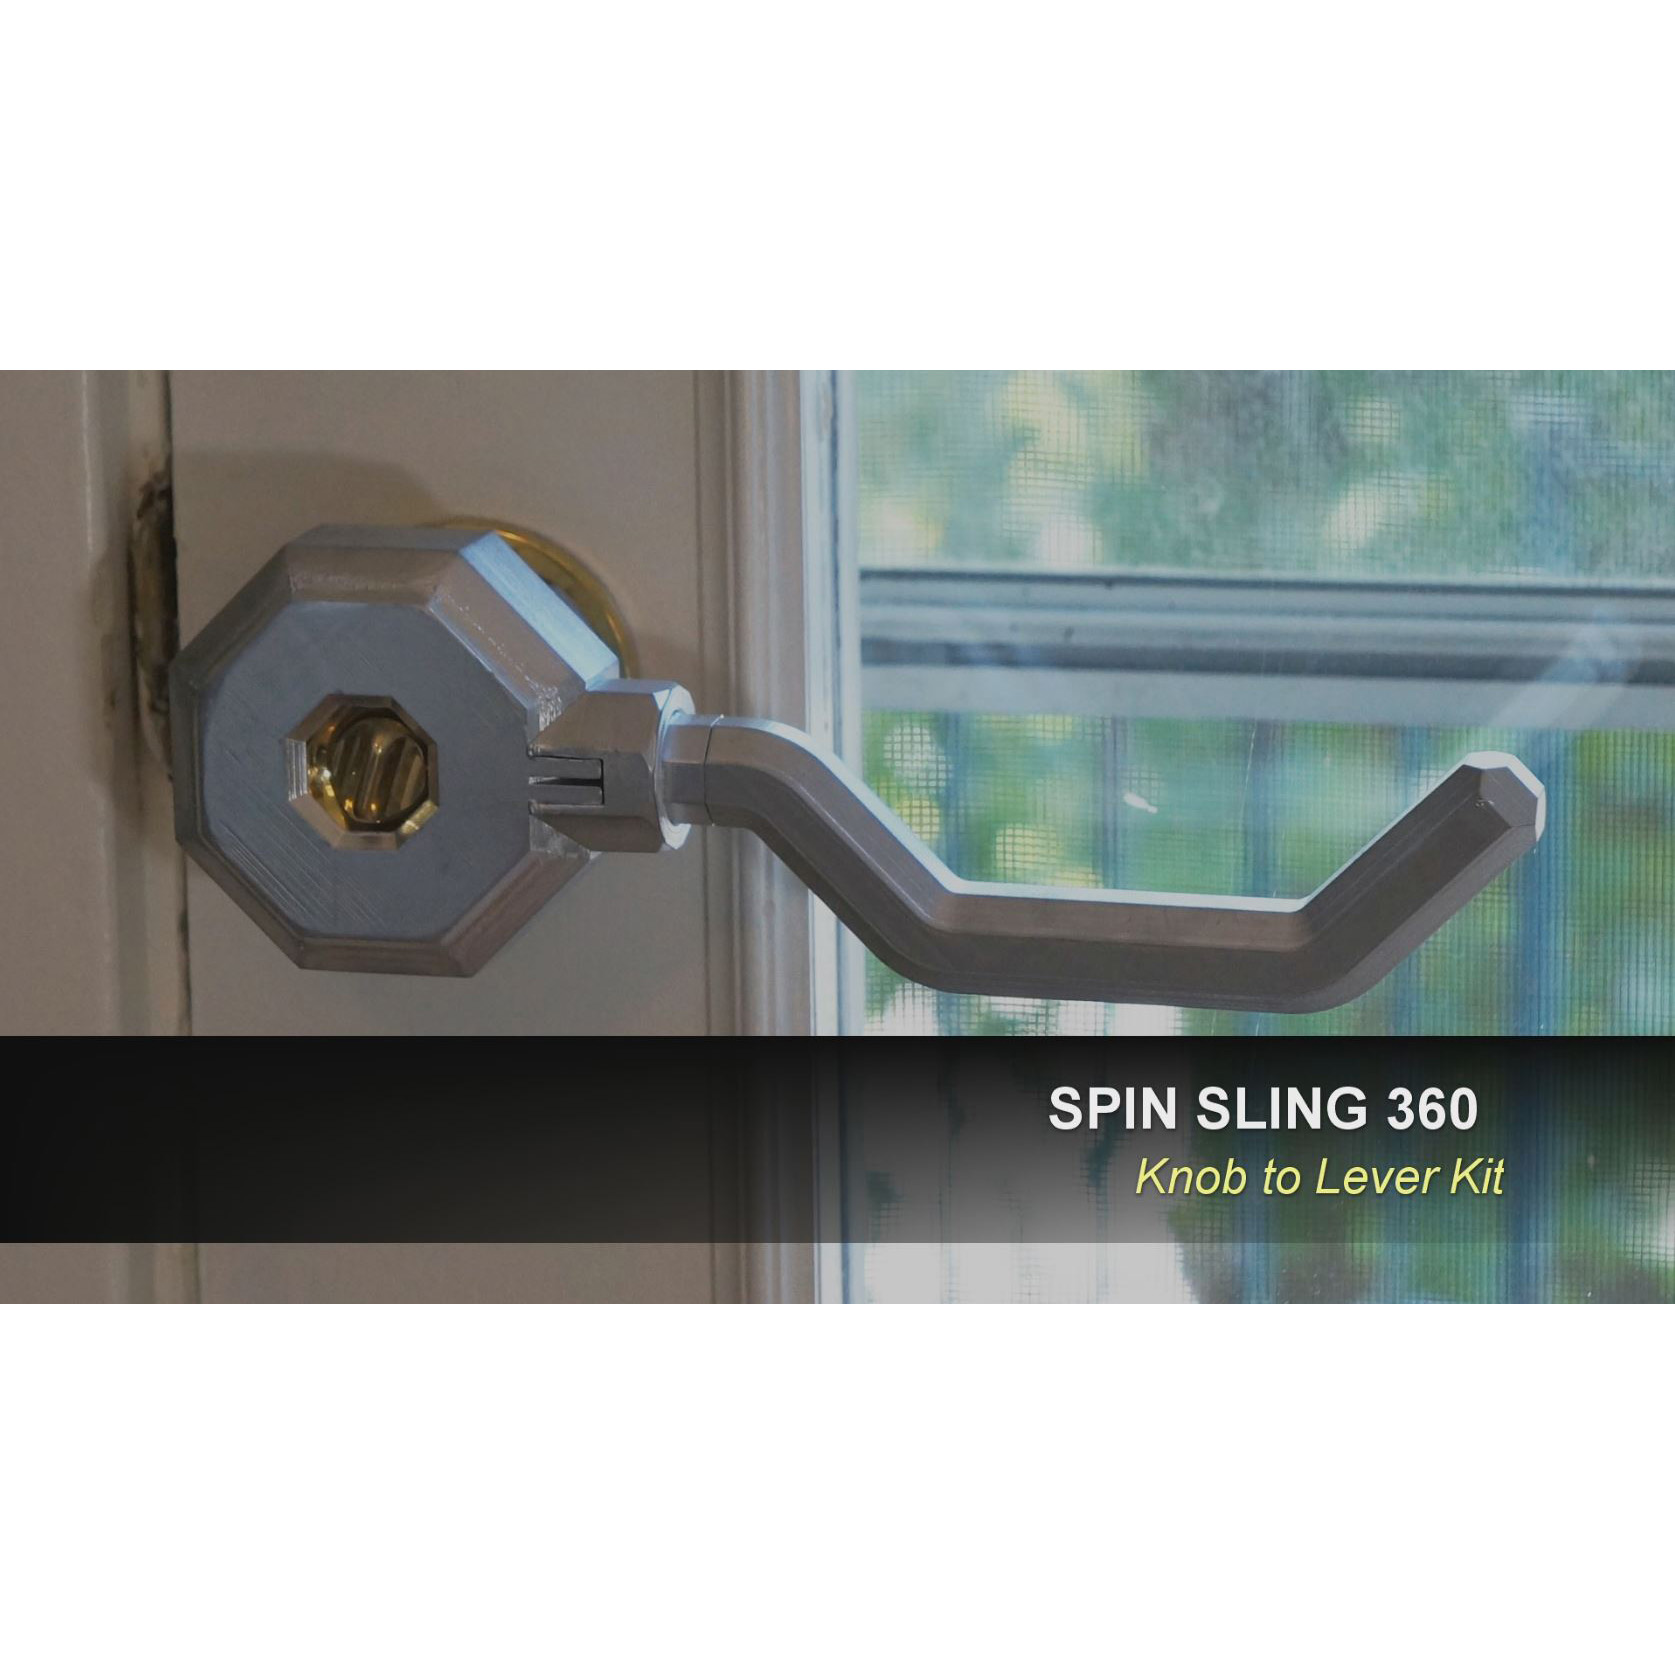 Spin Sling 360 Knob to Lever Kit